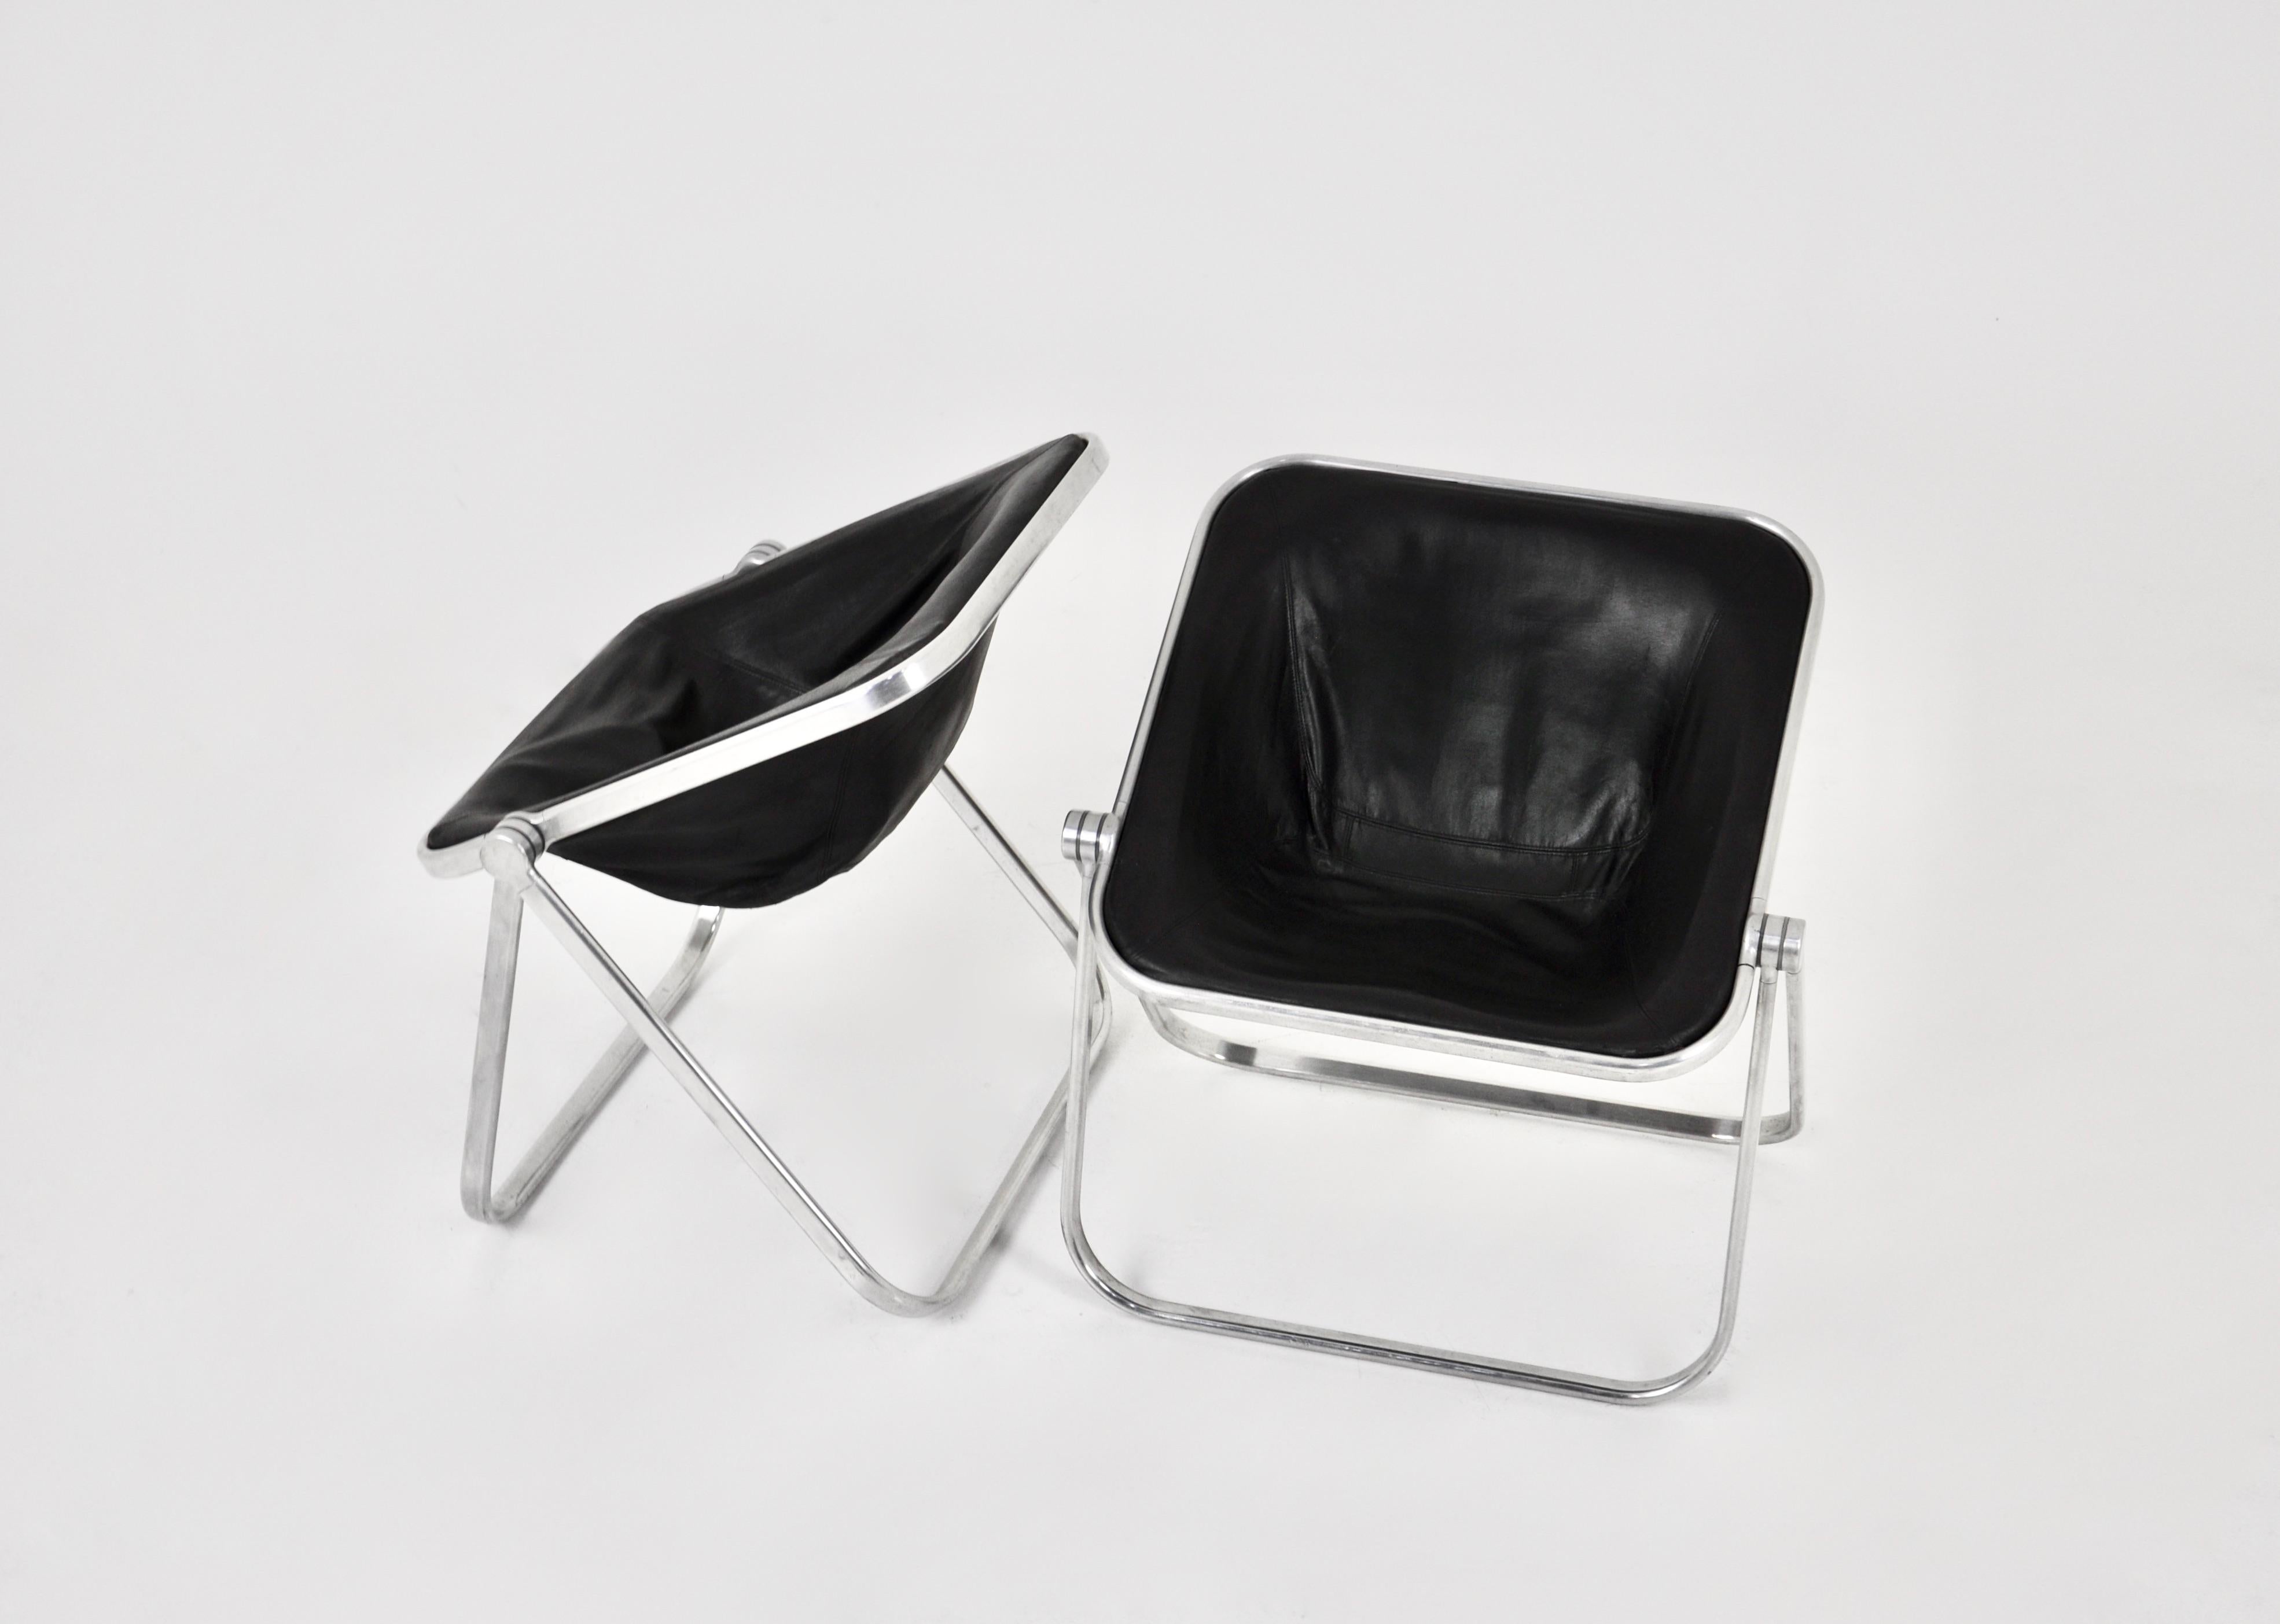 Mid-Century Modern Plona Desk Chair by Giancarlo Piretti for Anonima Castelli 1970s, set of 2 For Sale